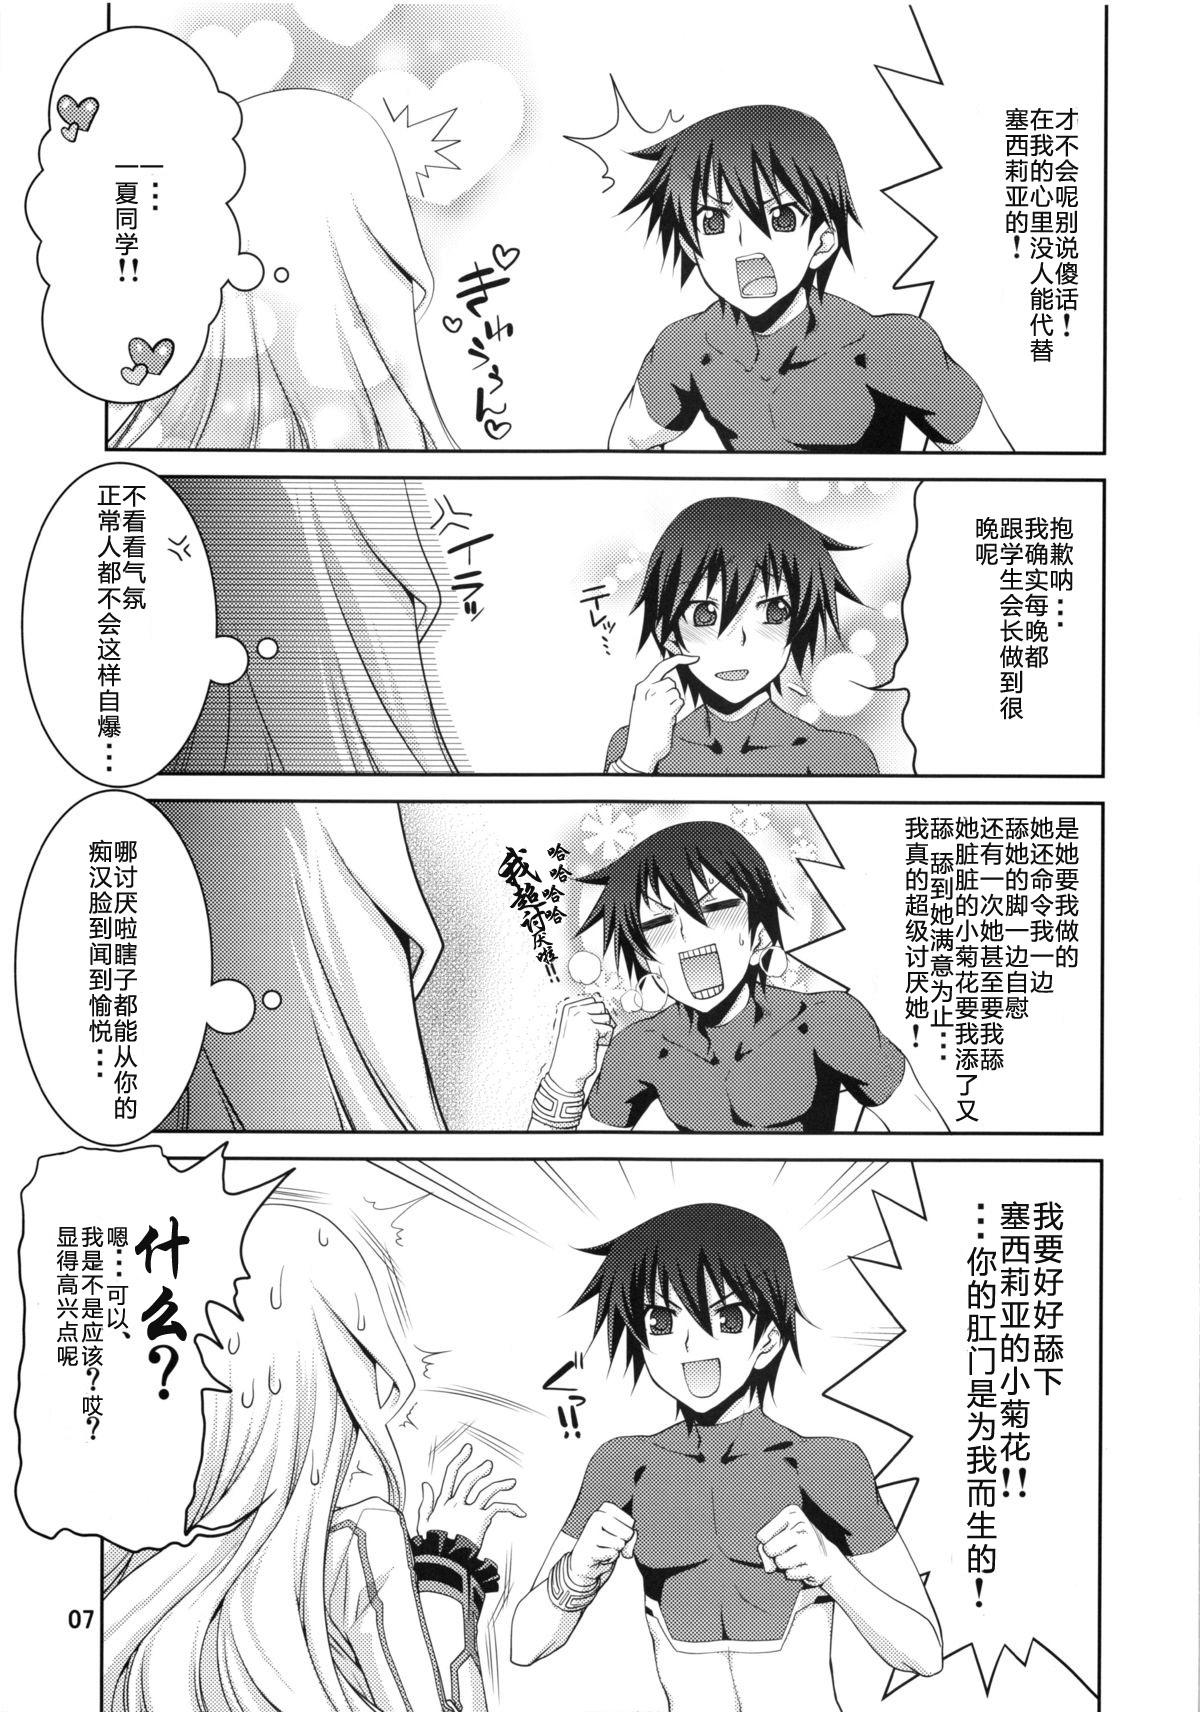 Homemade IS 2 - Infinite stratos Amatures Gone Wild - Page 6